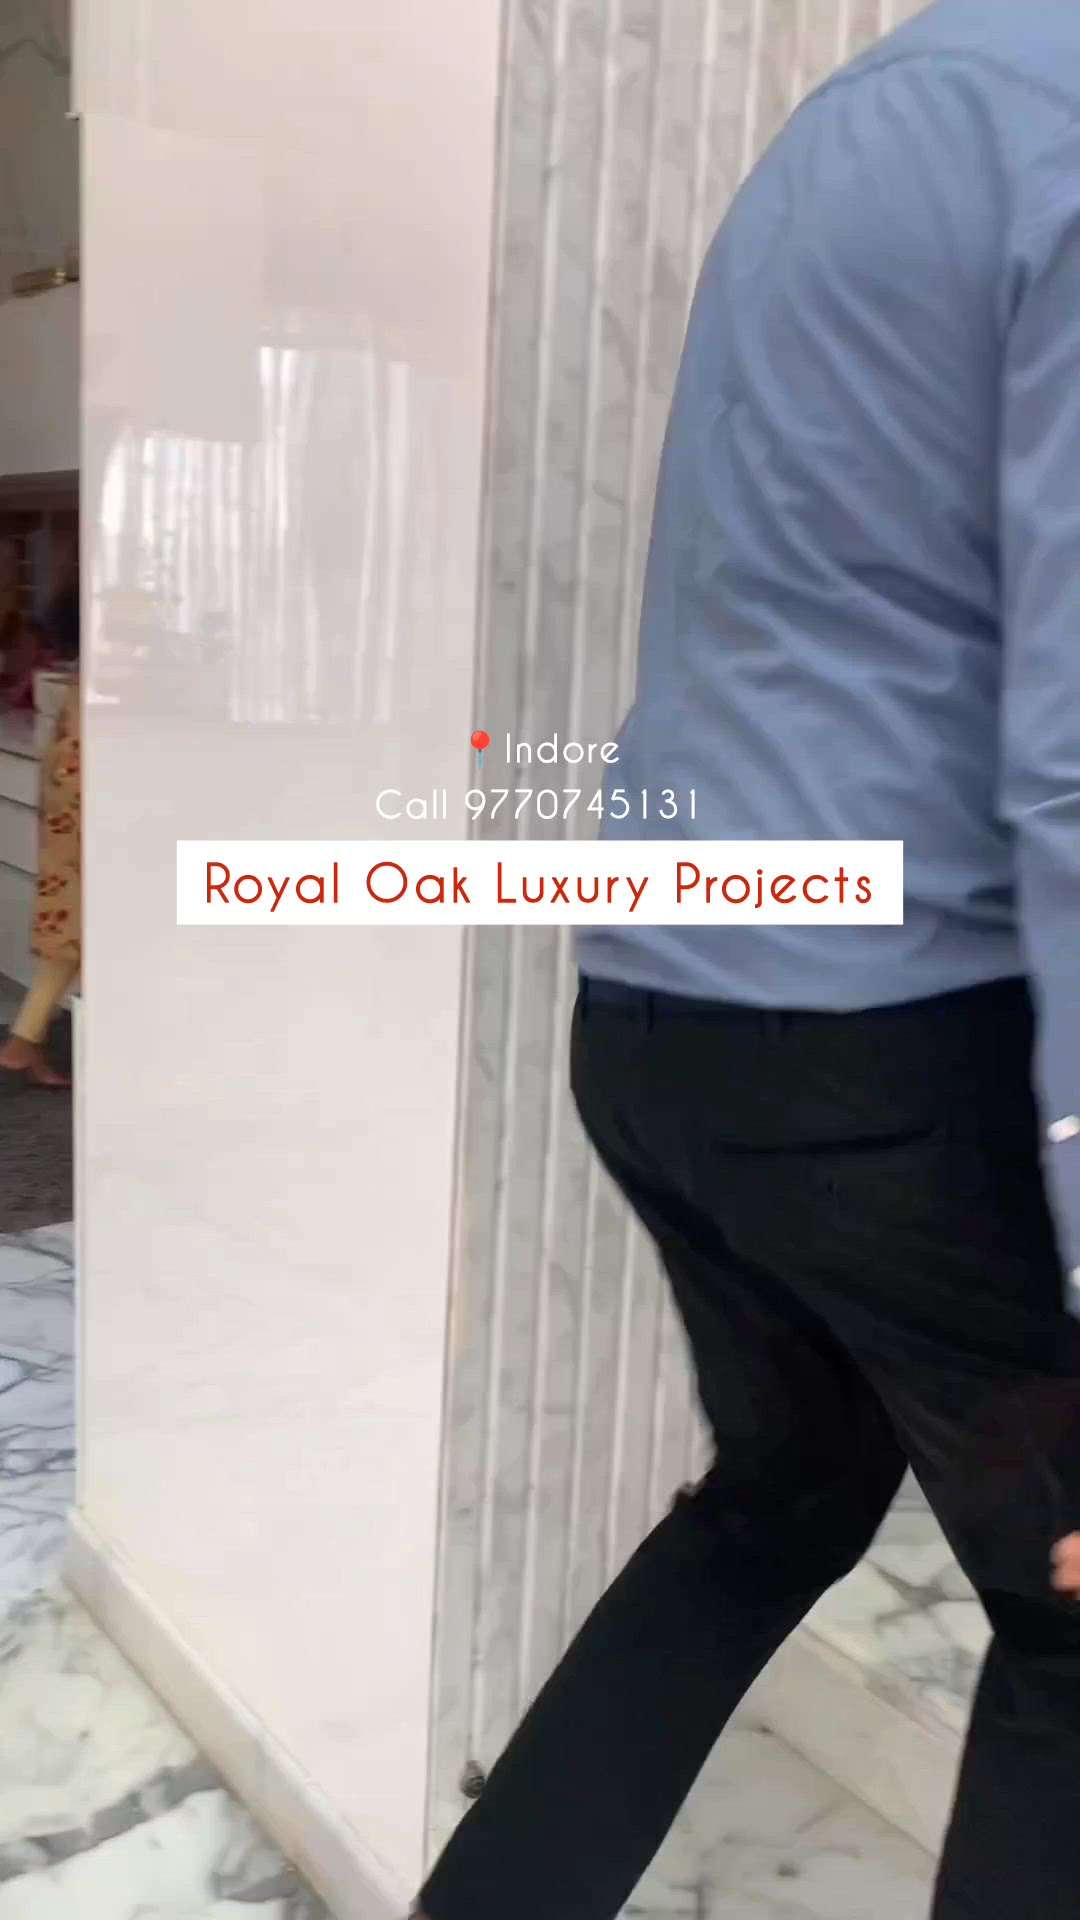 Call 9770745131. Royal Oak Projects specialize in luxury and everlasting architecture and interior design projects in Indore and surrounding cities. Message us for a free consultation on new construction, home renovation or furnishing of your home or office. 

___________
#home  #Architect #architecturedesigns   #Architectural&Interior #architact #homesweethome #homedecor #homedesign #homeinterior #architecture #builder #interiordesign #design #luxury #luxuryhomes #housedesign #interior #construction  #homeinspiration #homestyle #homes #realestate #koloapp  #livingroom #livingroomdecor #bedroomdesign #bedroom #pool #indore #india #indorecity #madhyapradesh #mp #indori #indoregram